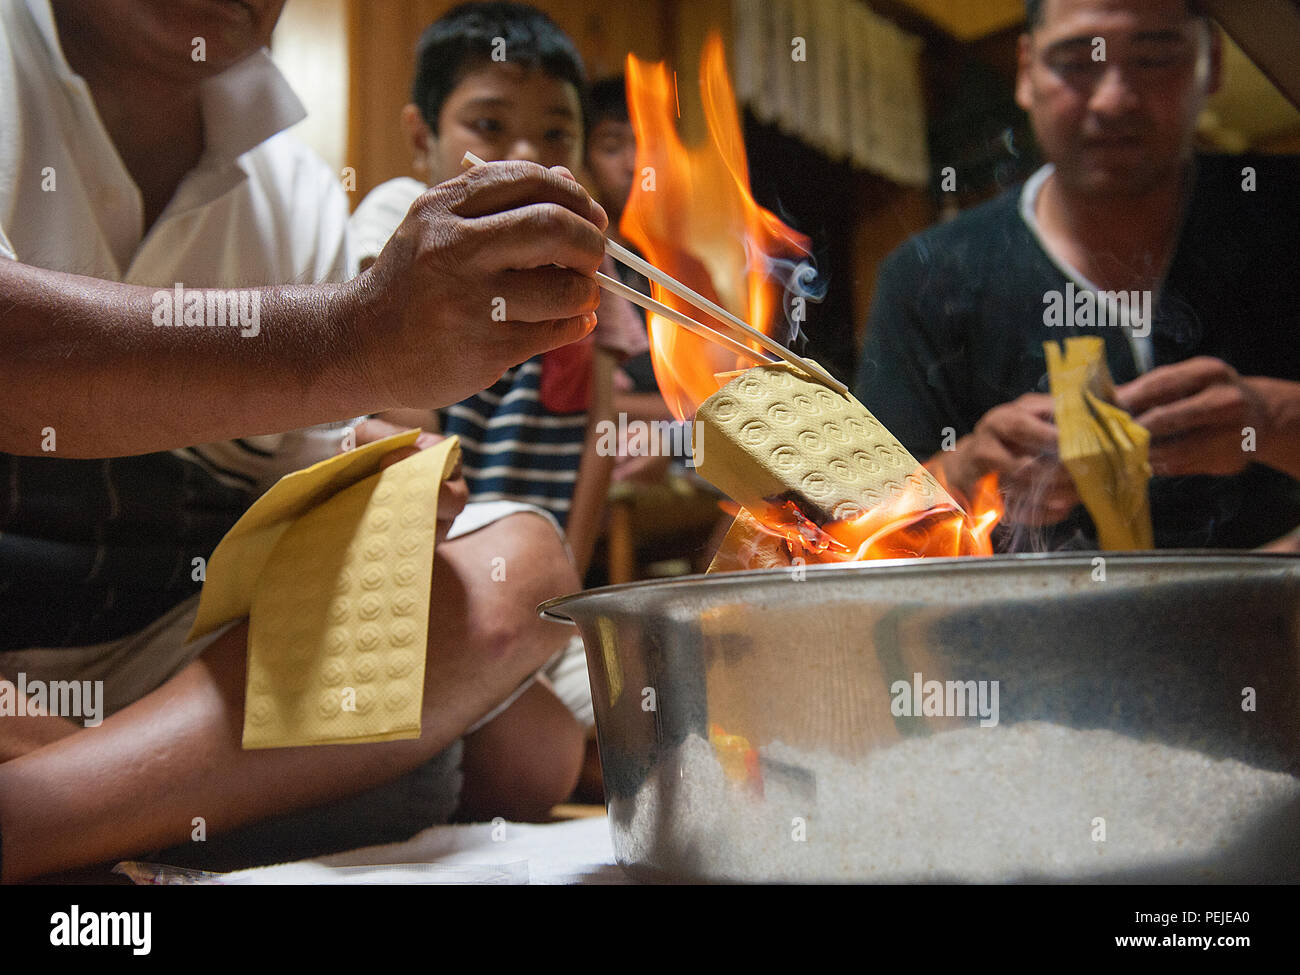 Sousei Yamakawa, owner of the house, burns uchikabi, money of the other world, during the last day of Obon in Yomitan village, Okinawa, Japan, Aug. 28, 2015. During Obon, a lot of businesses are closed and many people travel to be with their relatives. (U.S. Air Force photo by Naoto Anazawa) Stock Photo